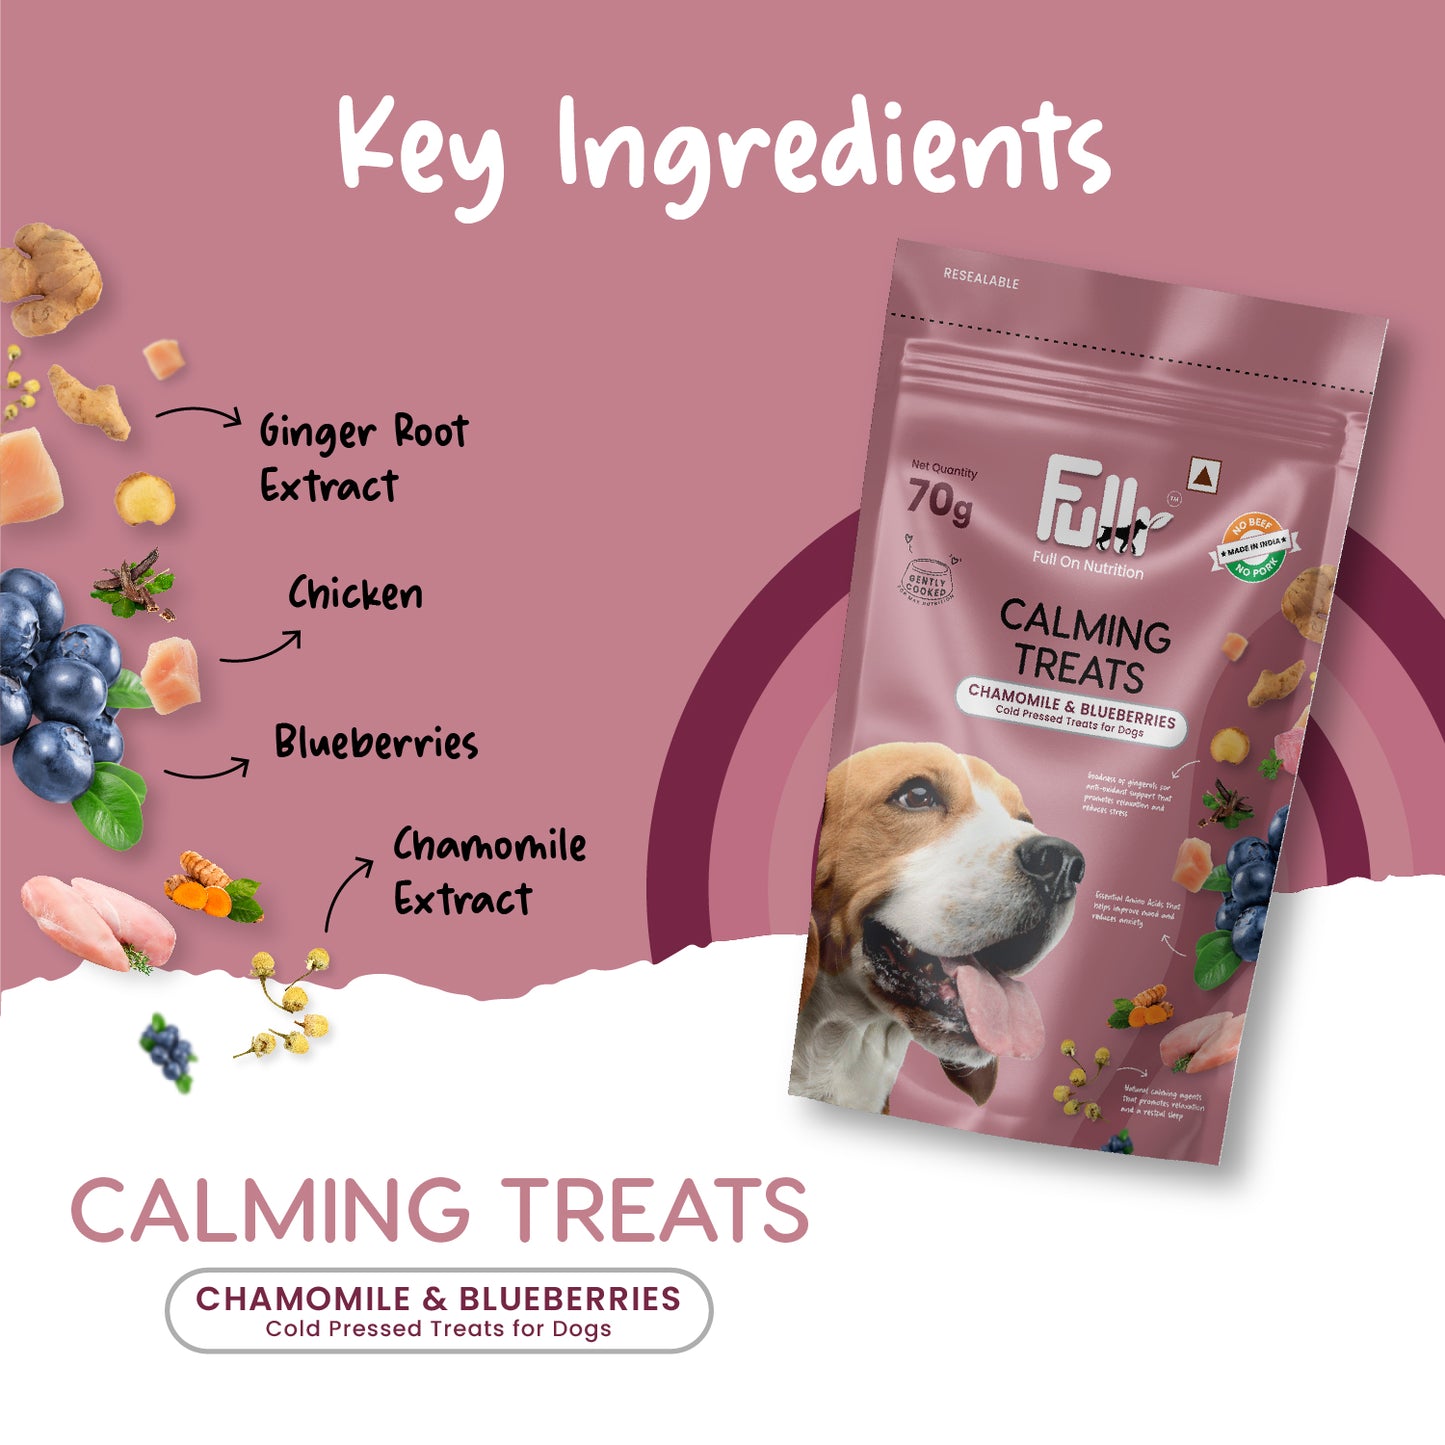 Key ingredients in Fullr Calming Treats - Ginger root extract, Chicken, Blueberries,Chamomile extract.